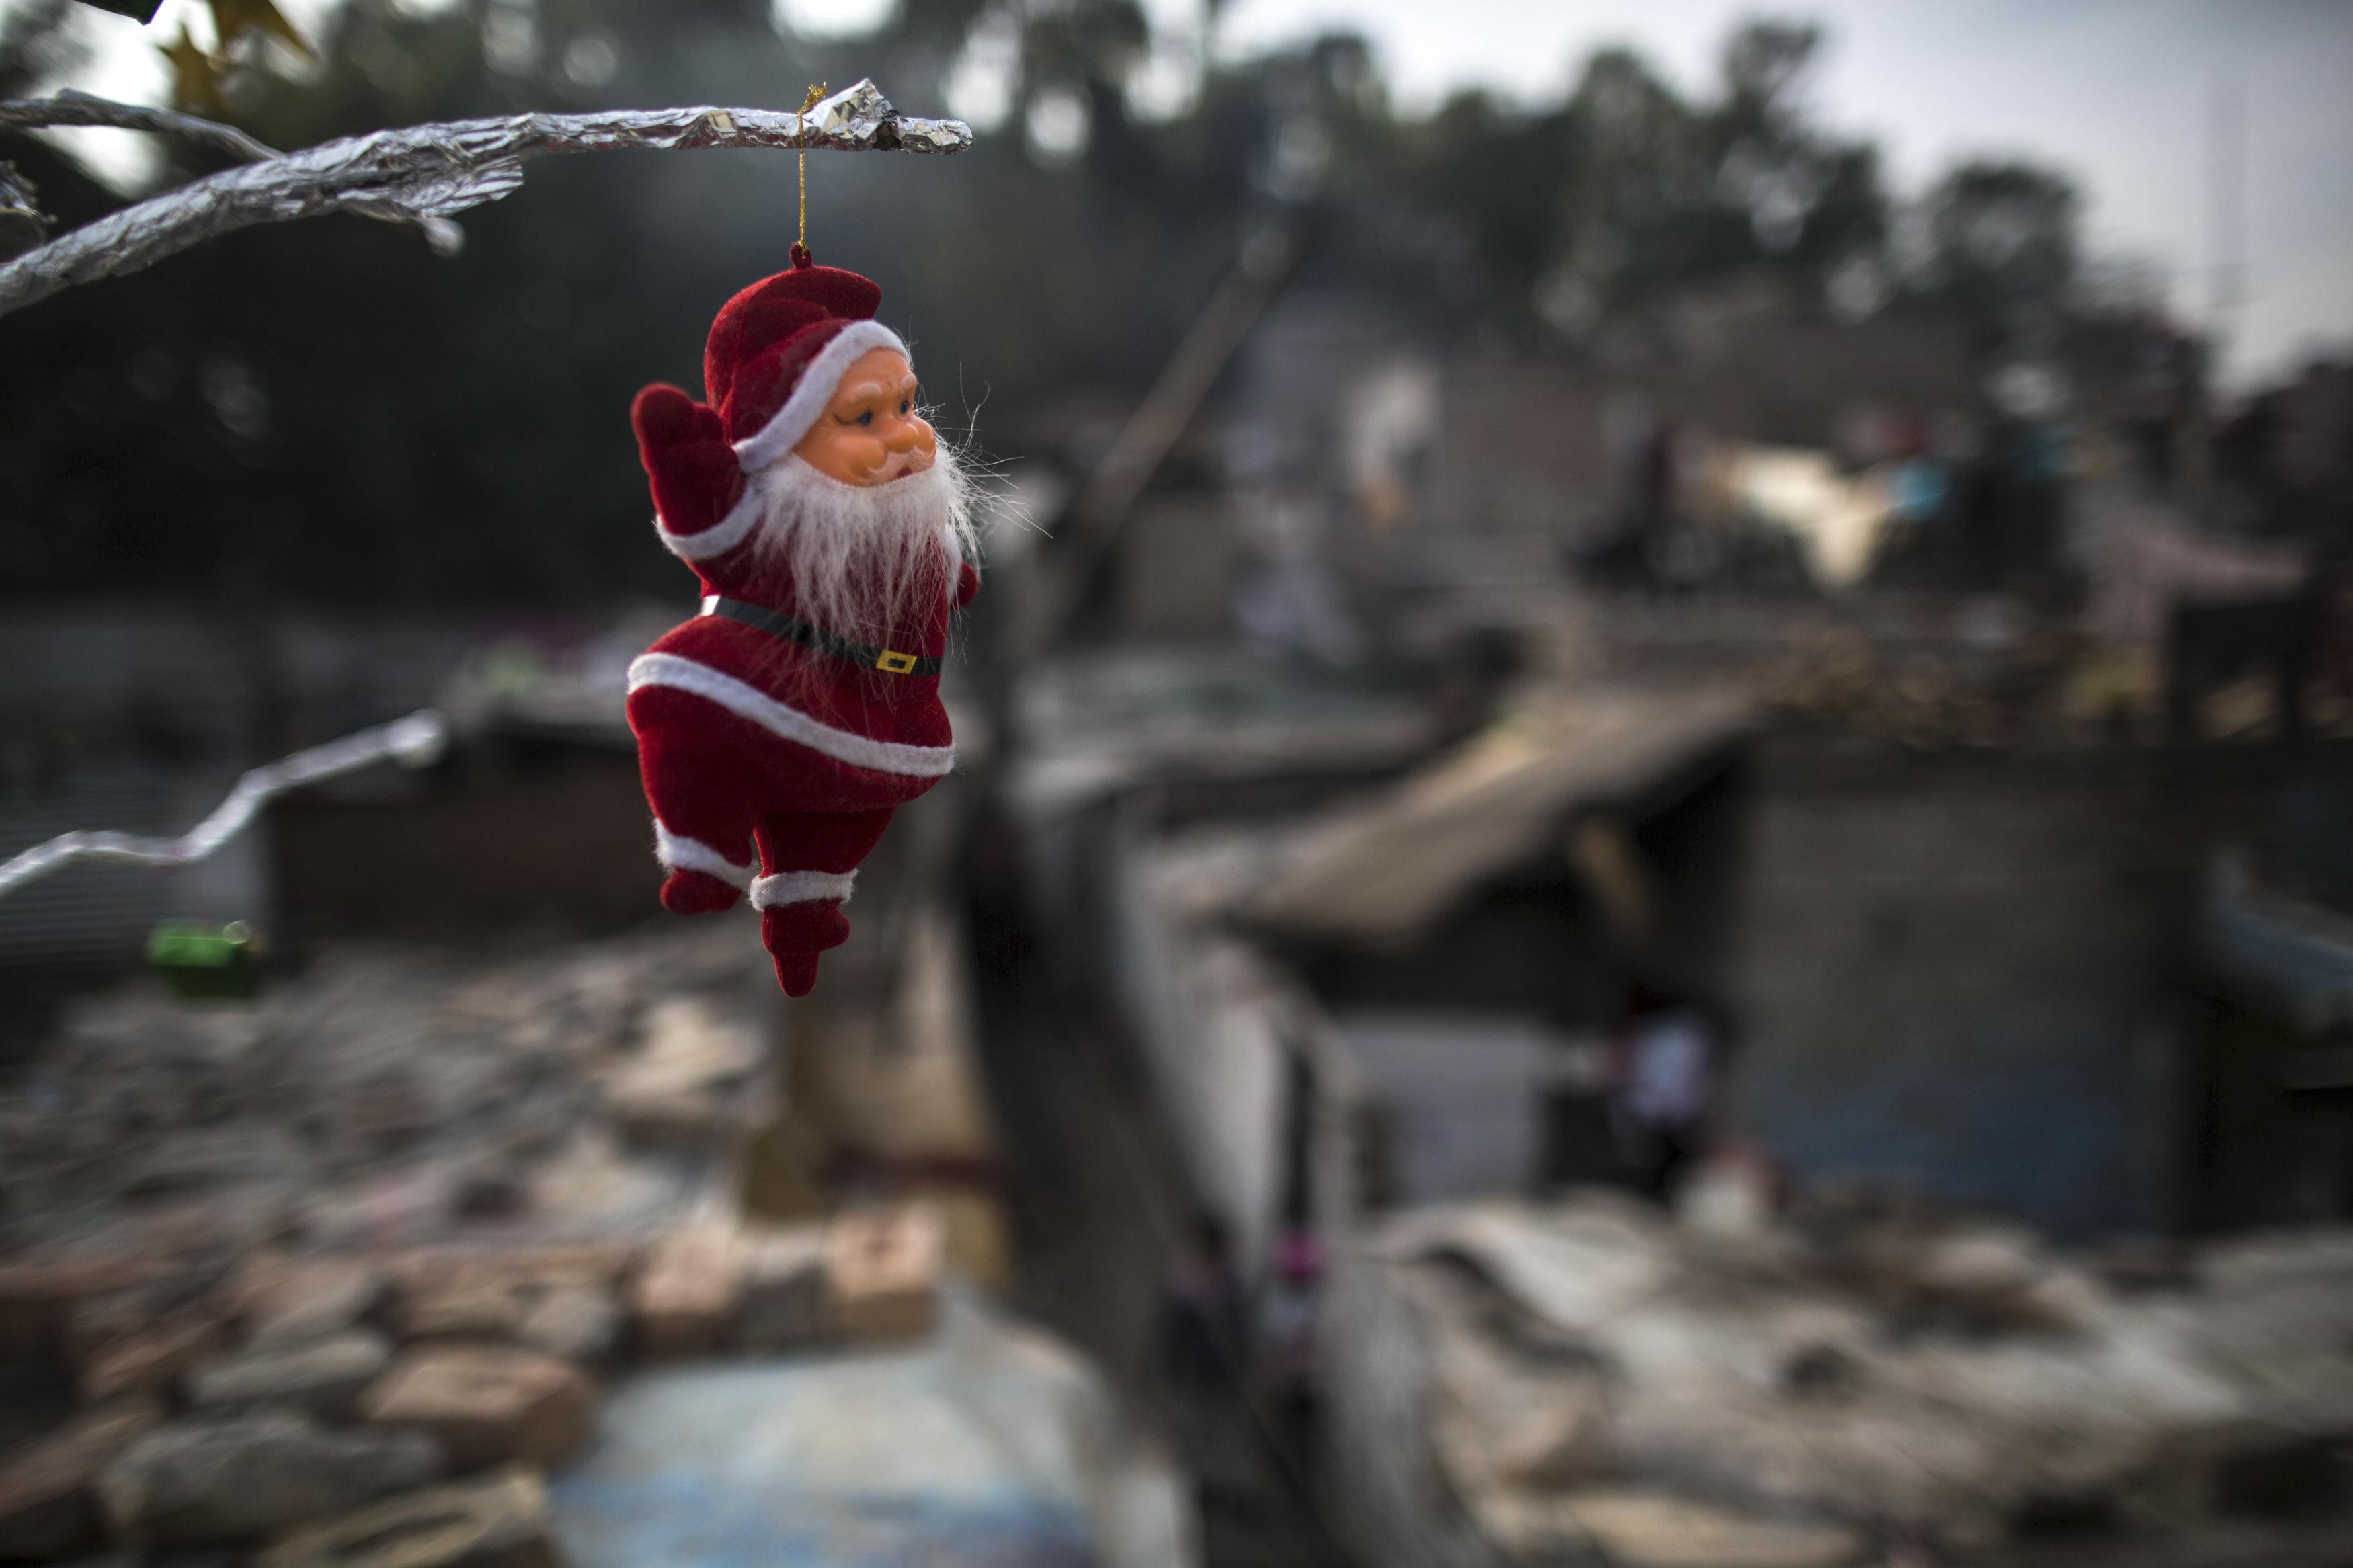 A Santa Claus figurine hangs from a tree ahead of Christmas in a Christian slum in Islamabad